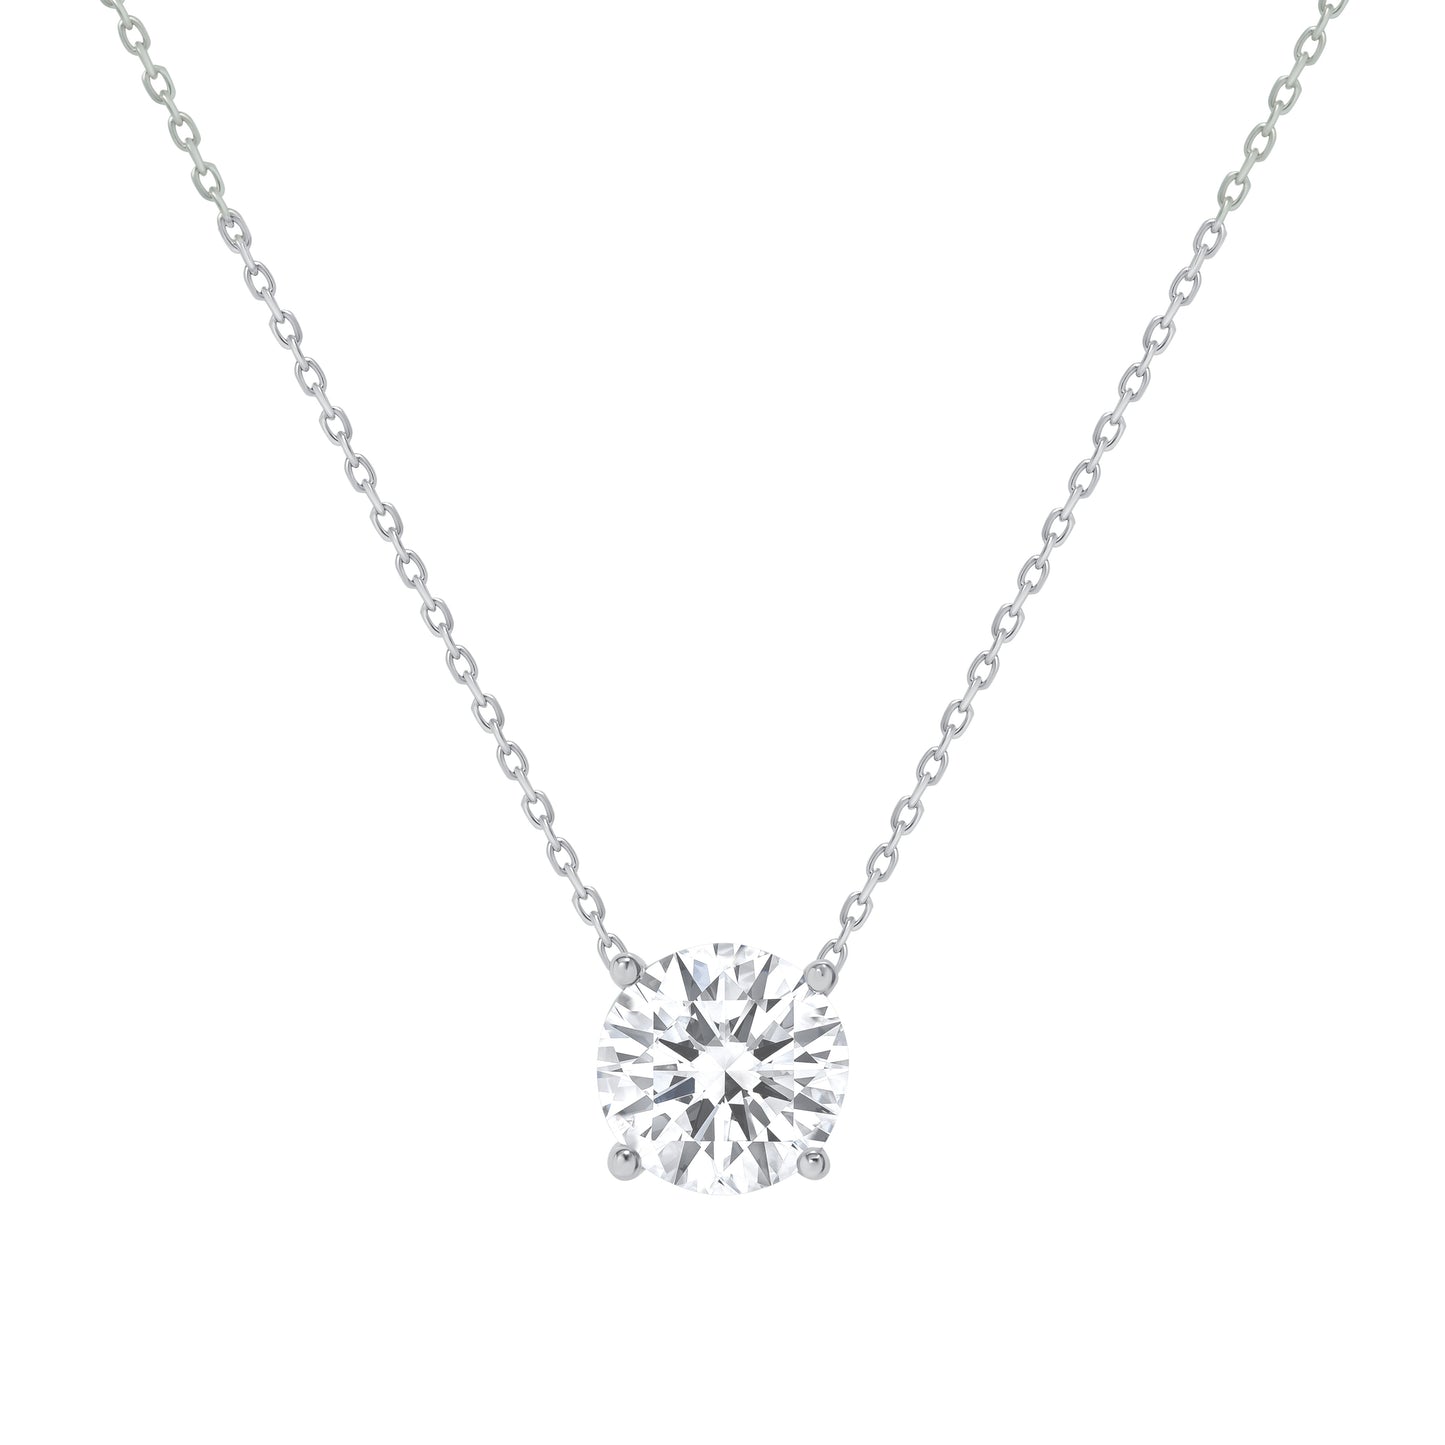 Silver 925 Rhodium Plated Round Cubic Zirconia Necklace. P25515